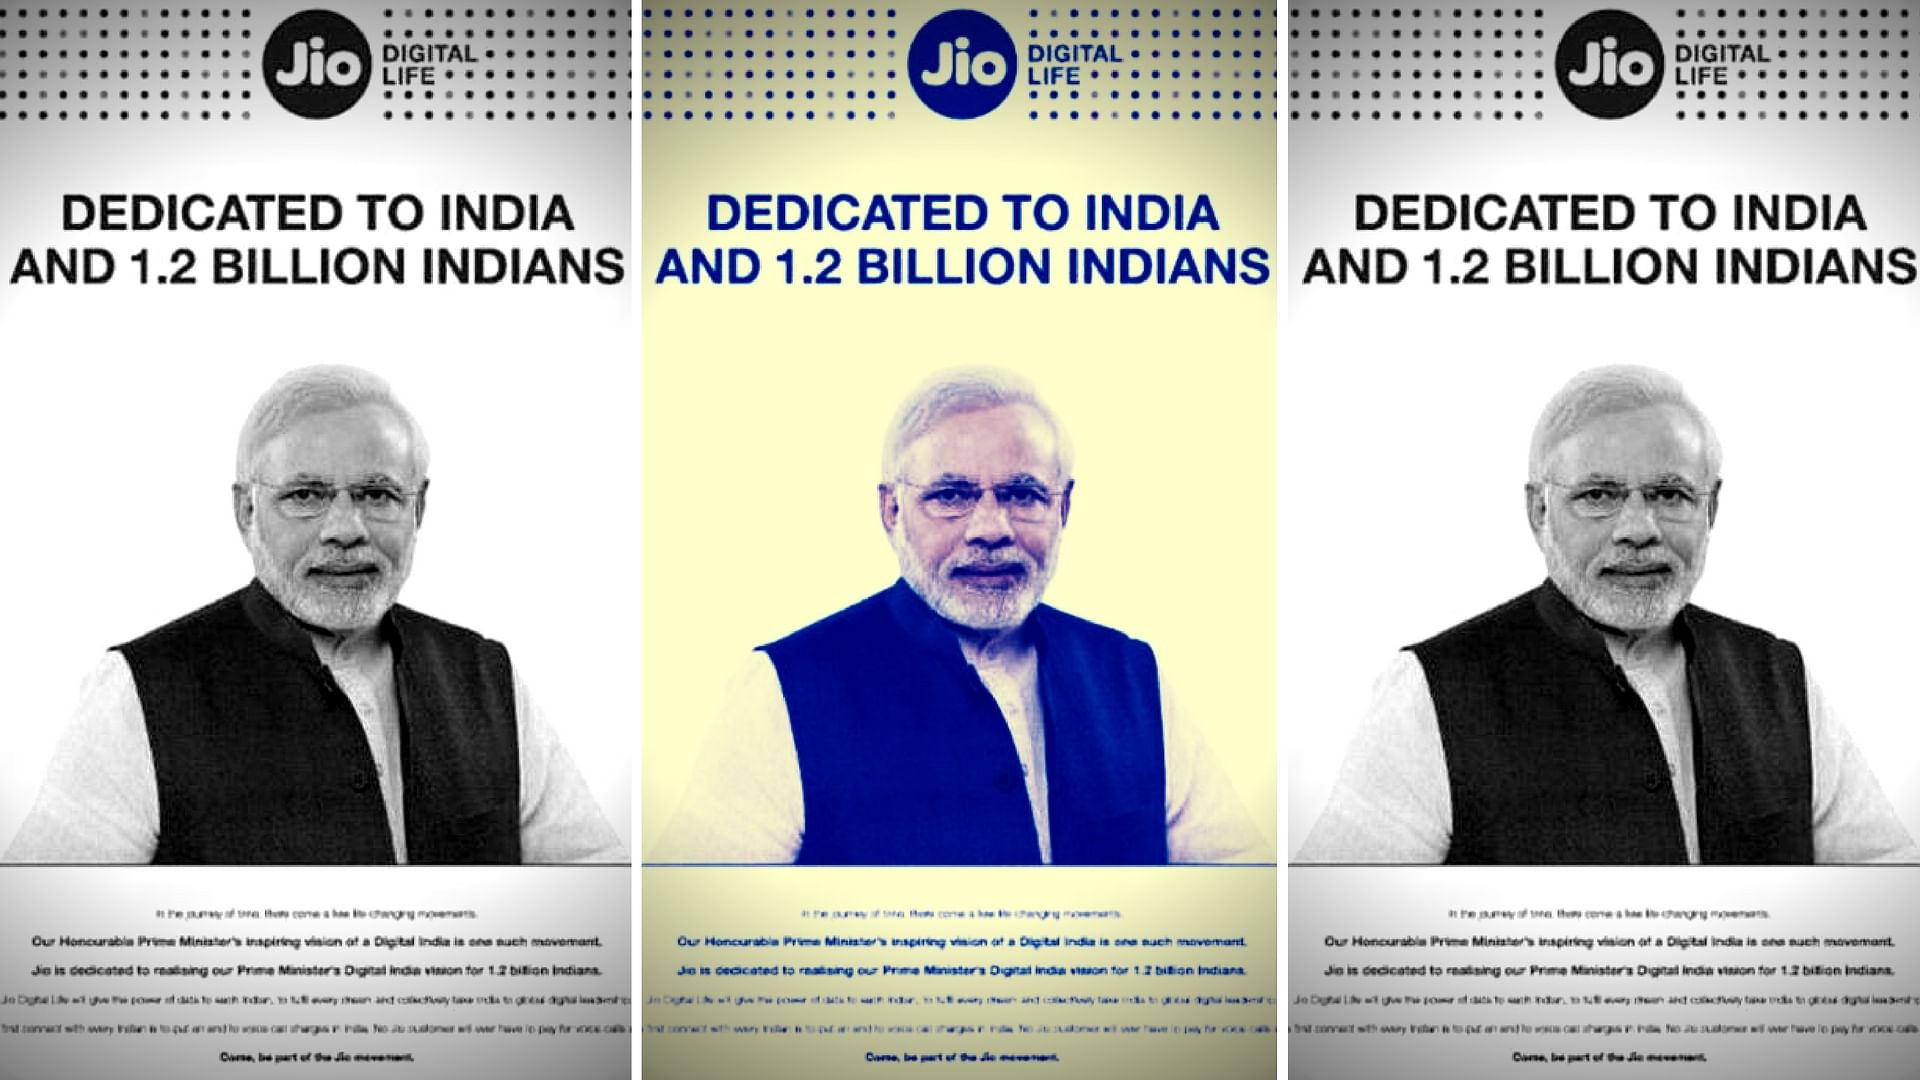 Both Paytm and Reliance Jio could pay fines for their use of Modi’s pictures in their ads (Photo: <b>The Quint</b>)